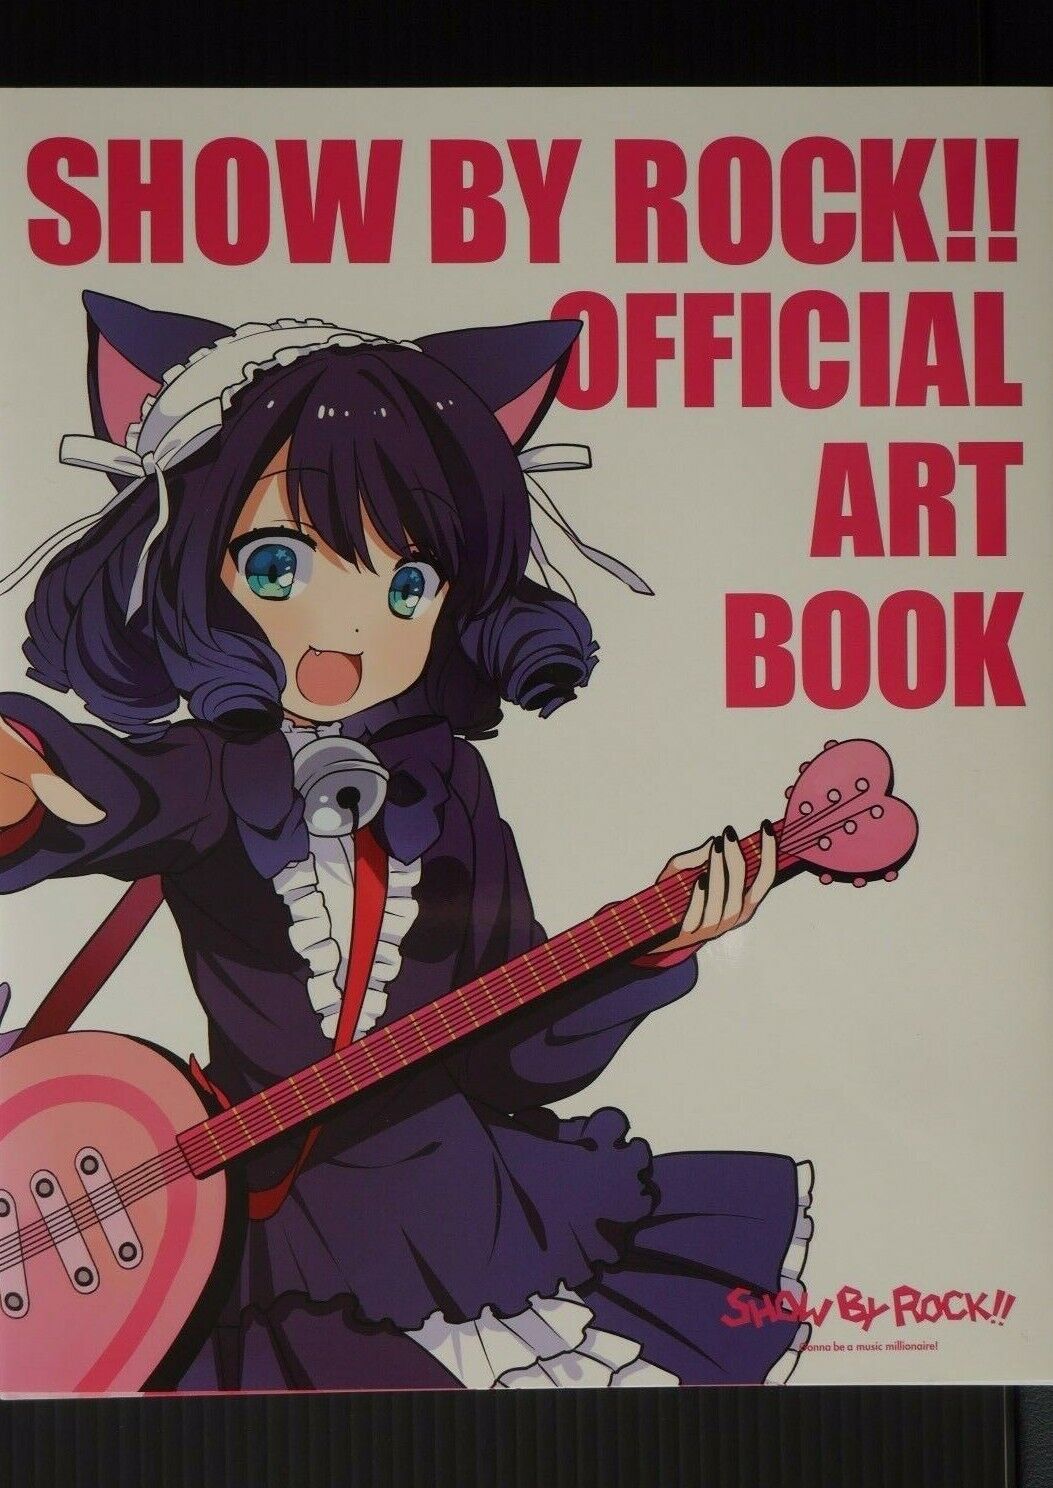 Show by Rock Official Art Book - from JAPAN